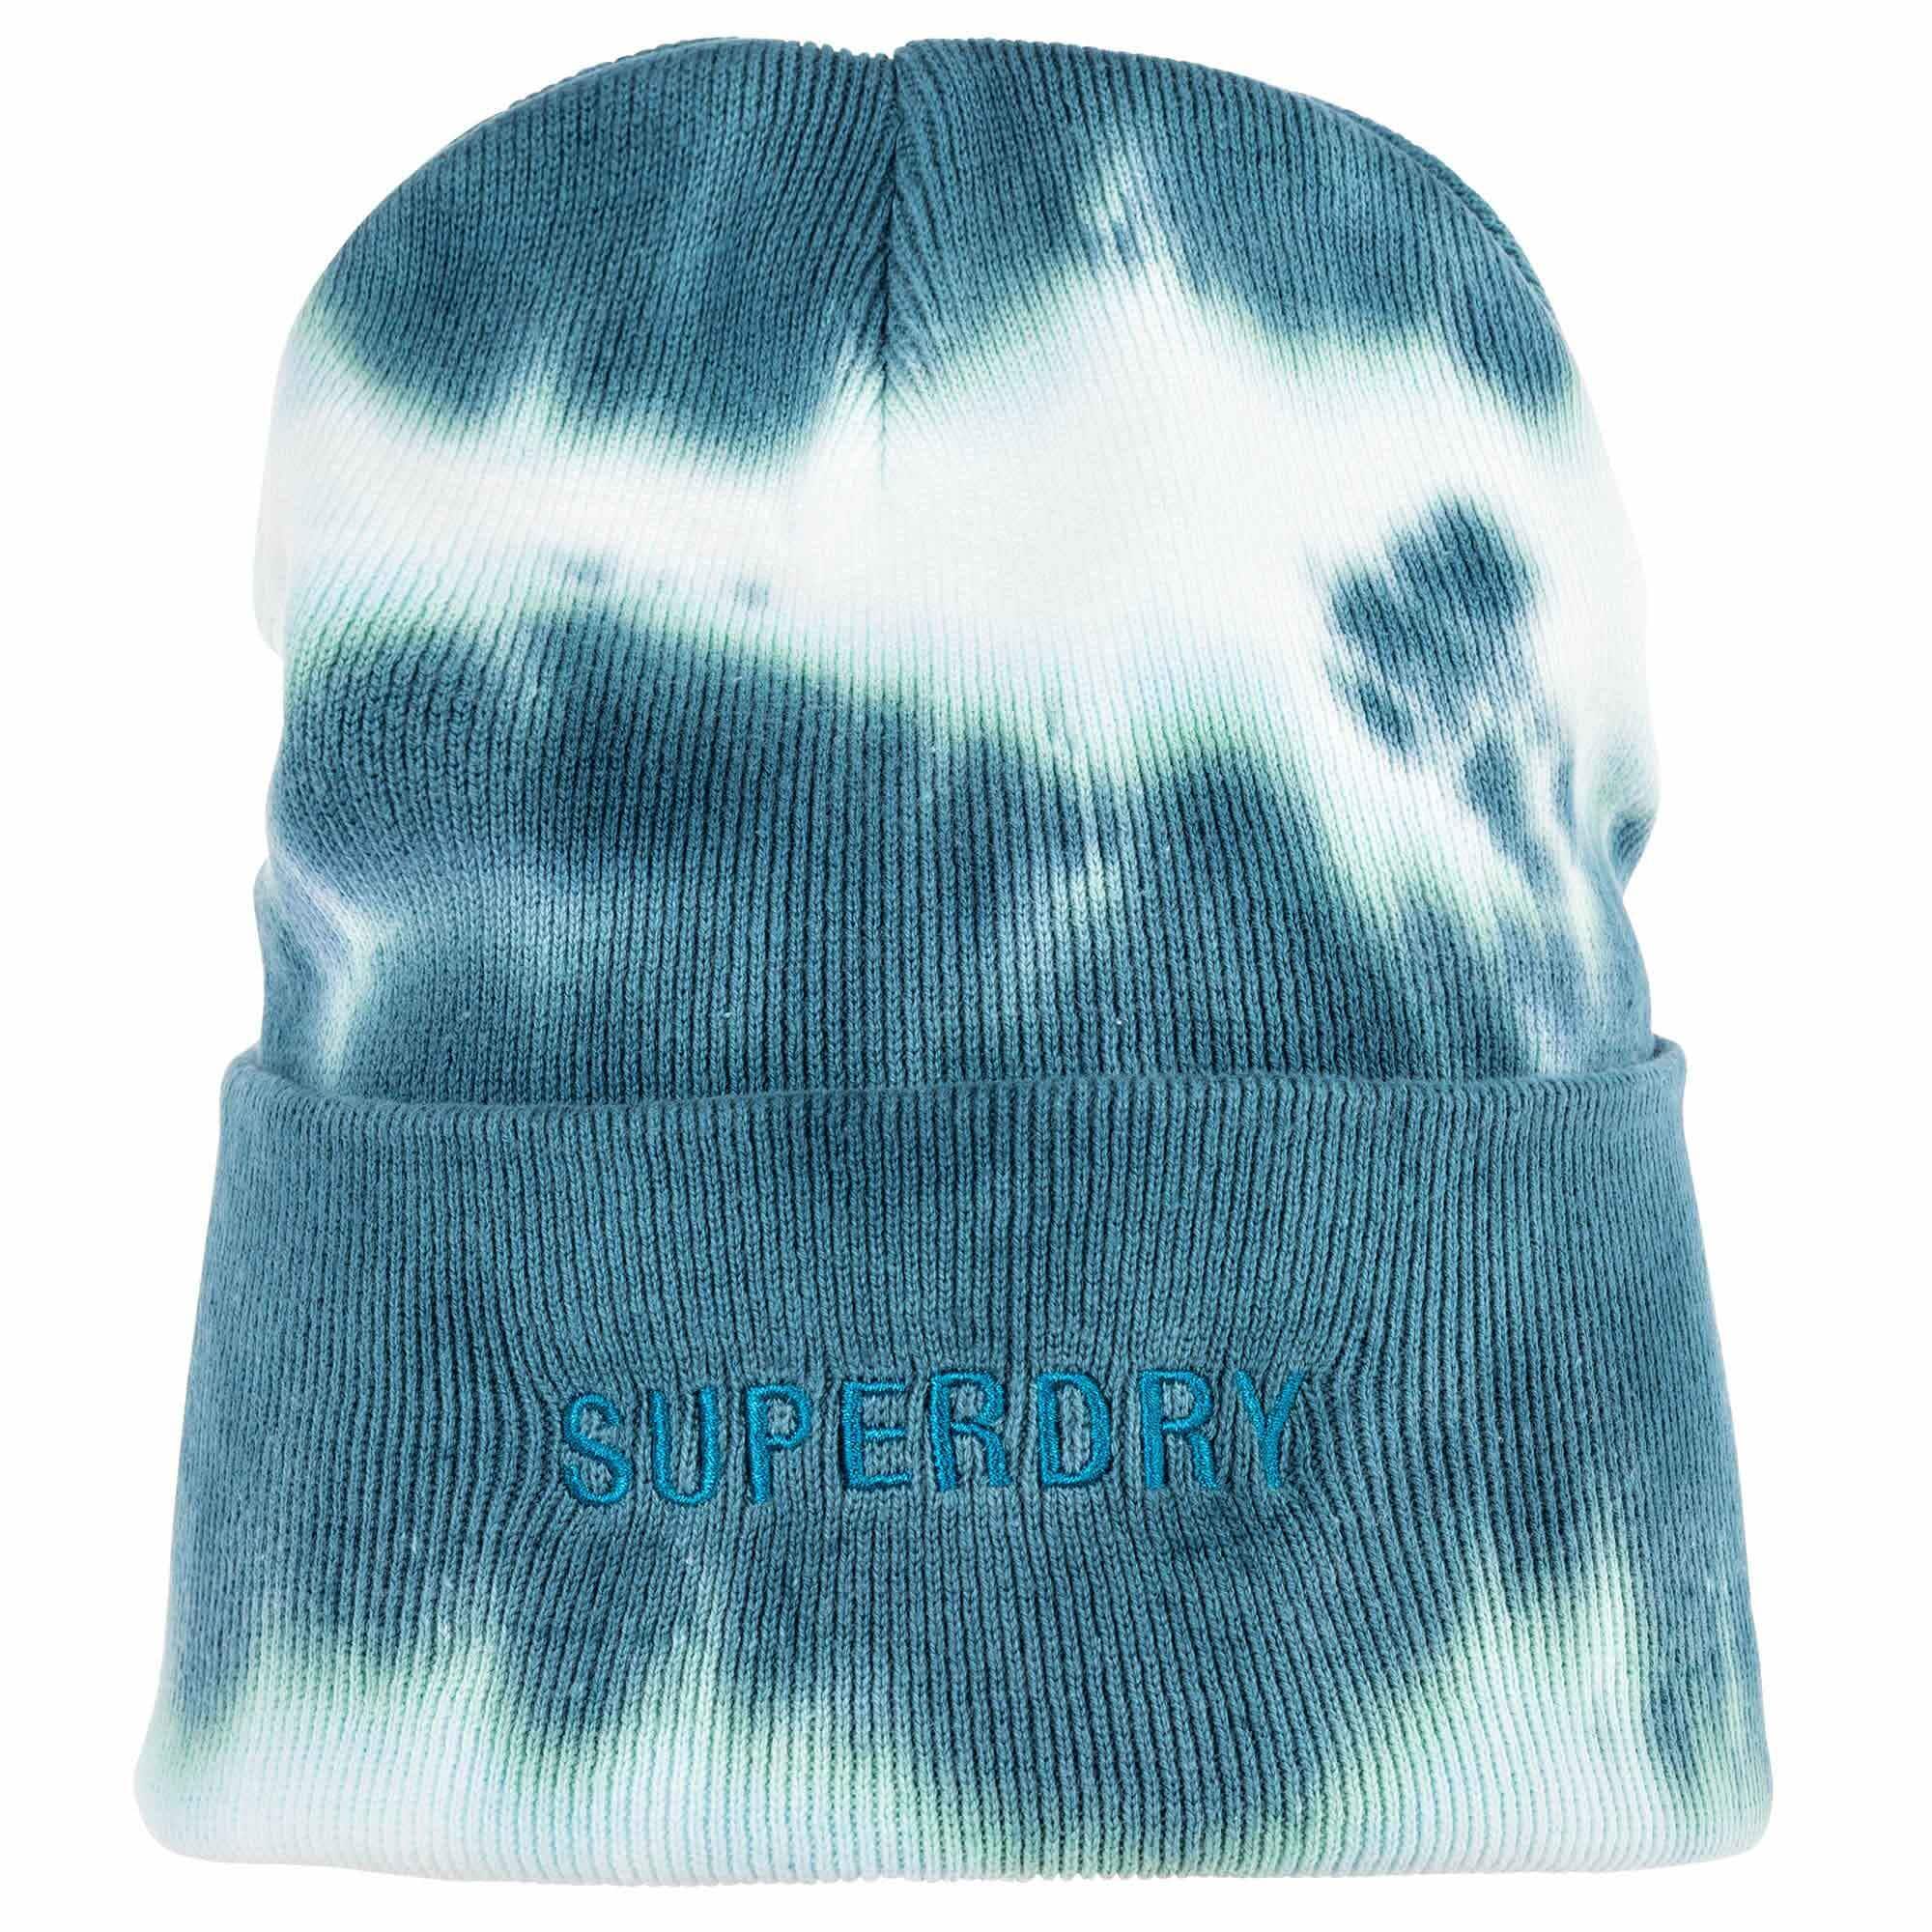 Superdry Superdry Mütze petrol / mint / offwhite